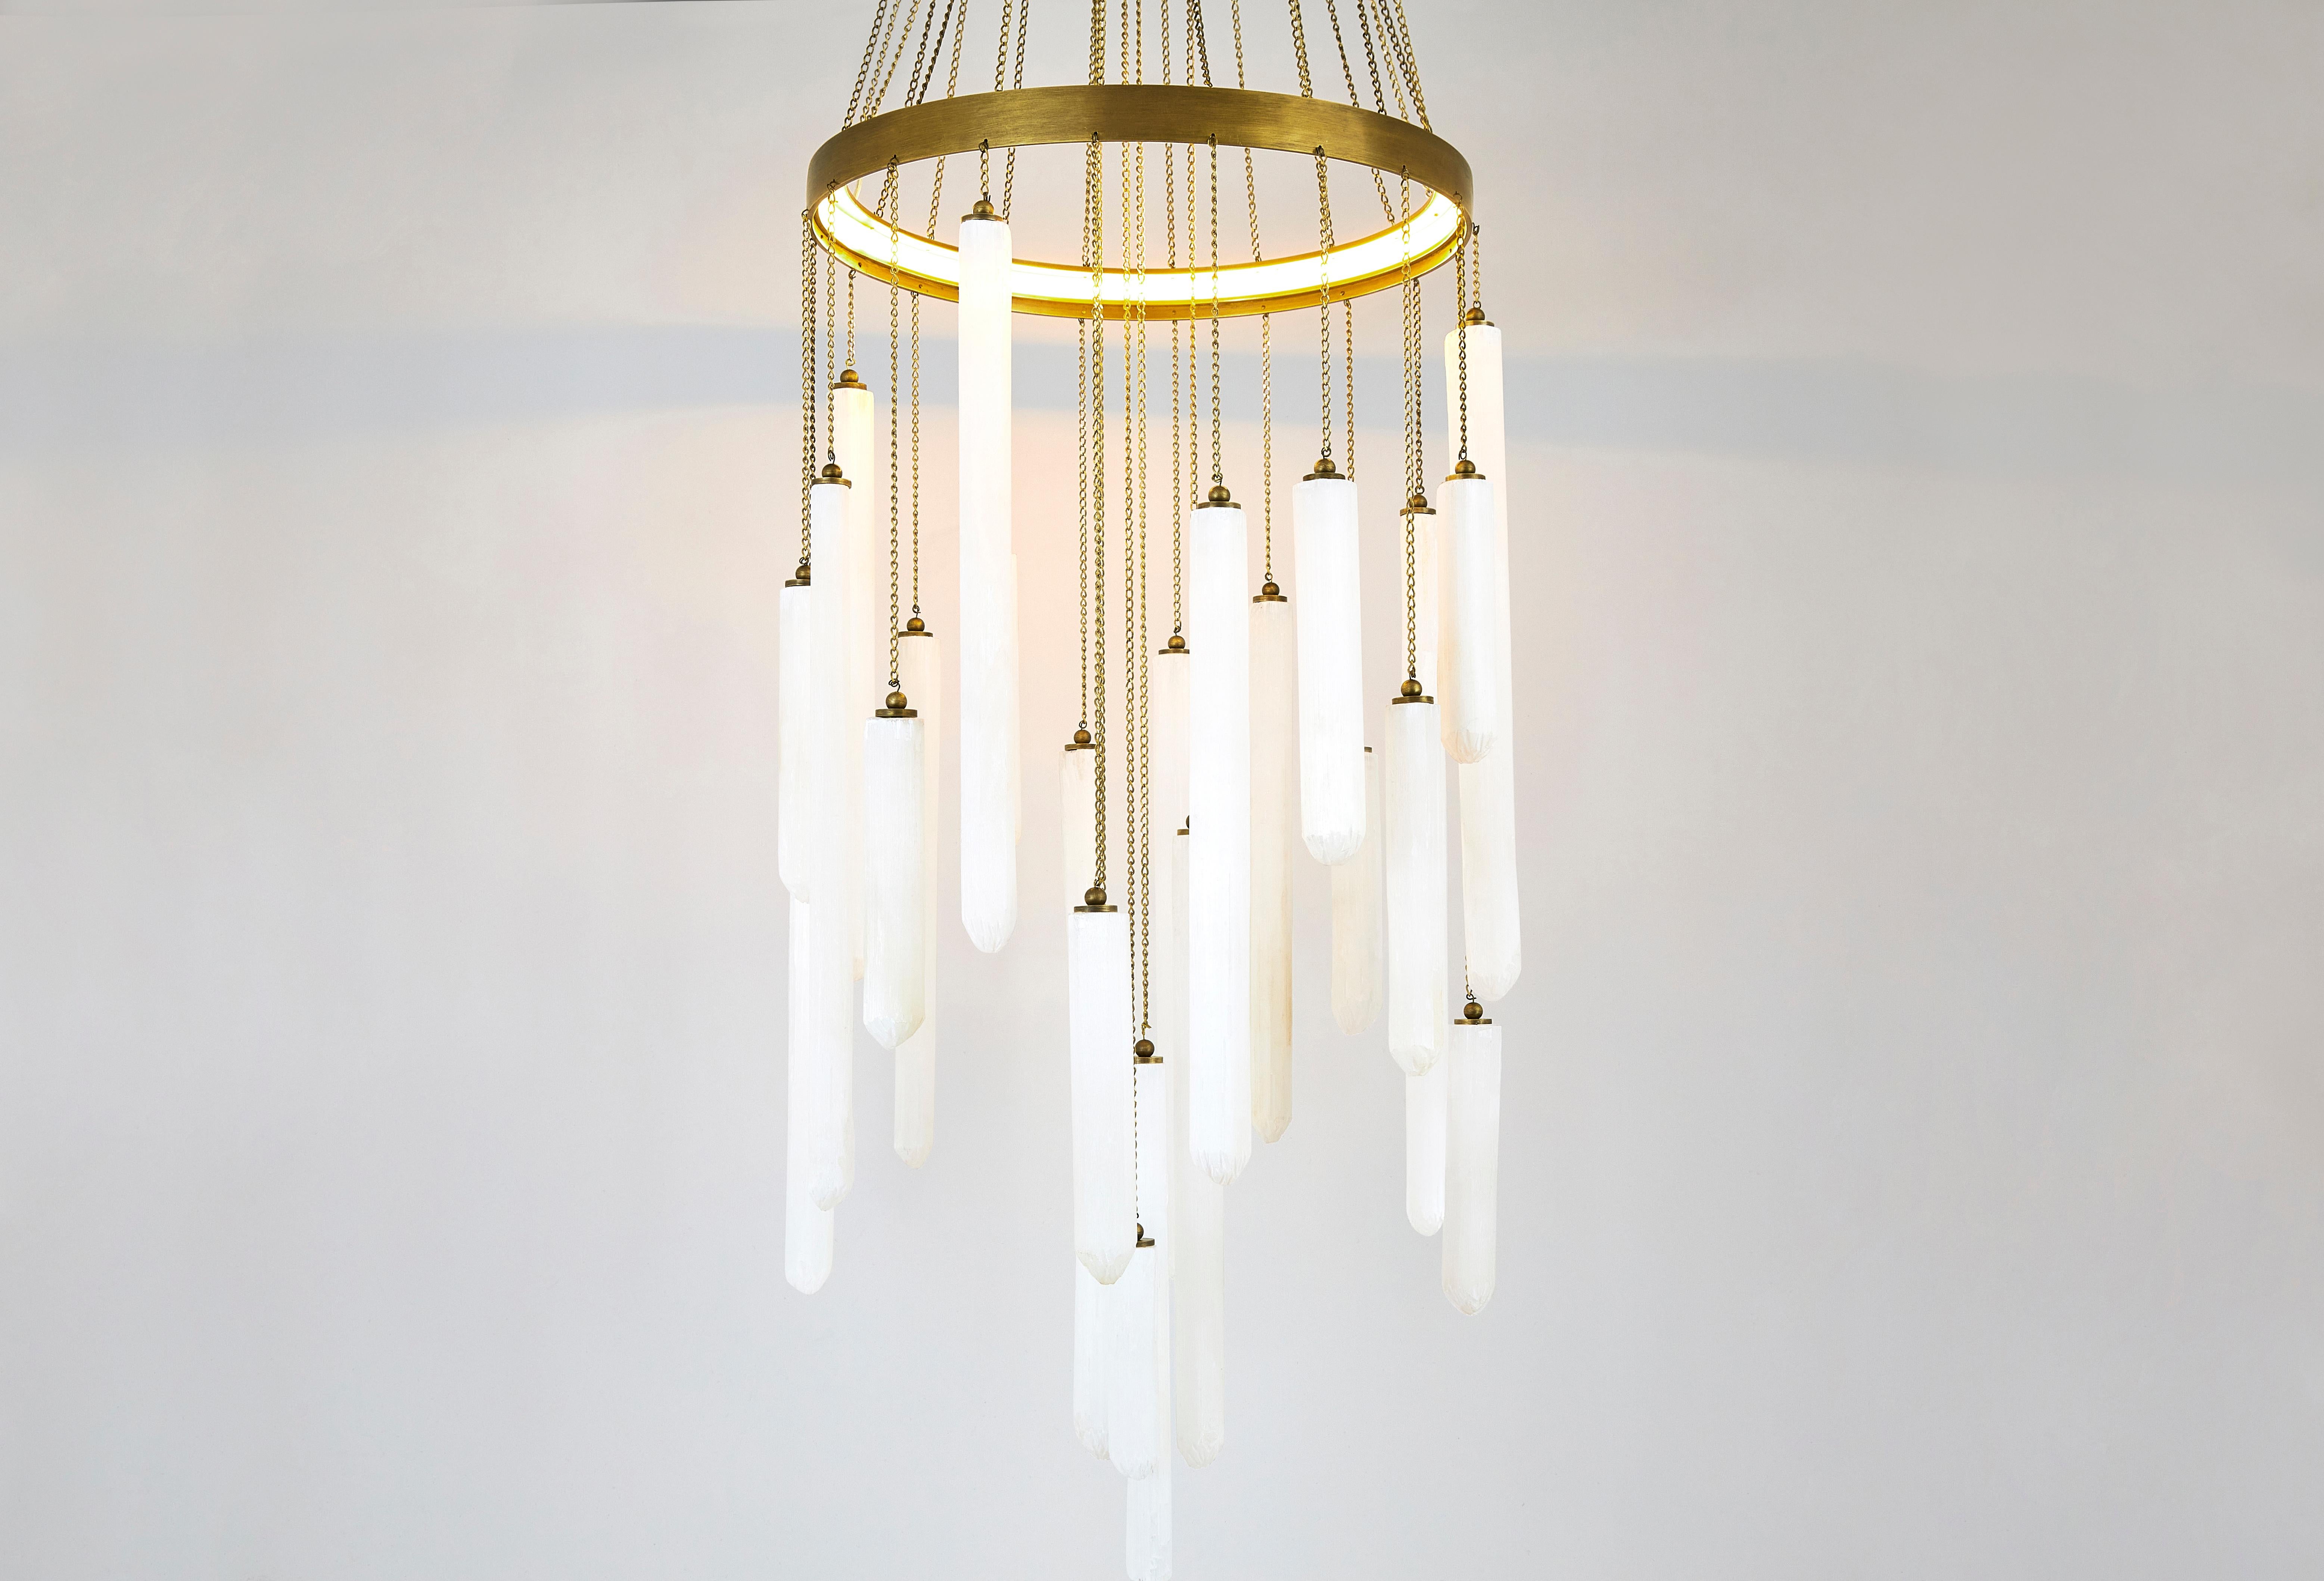 Our Coco Chain Pendant – available in multiple tiers – was created with a nod to Coco Chanel as we use the same chain as the iconic Chanel handbag. With beautiful hanging rock crystal rods cascading from delicate chains suspended by a circular, lit